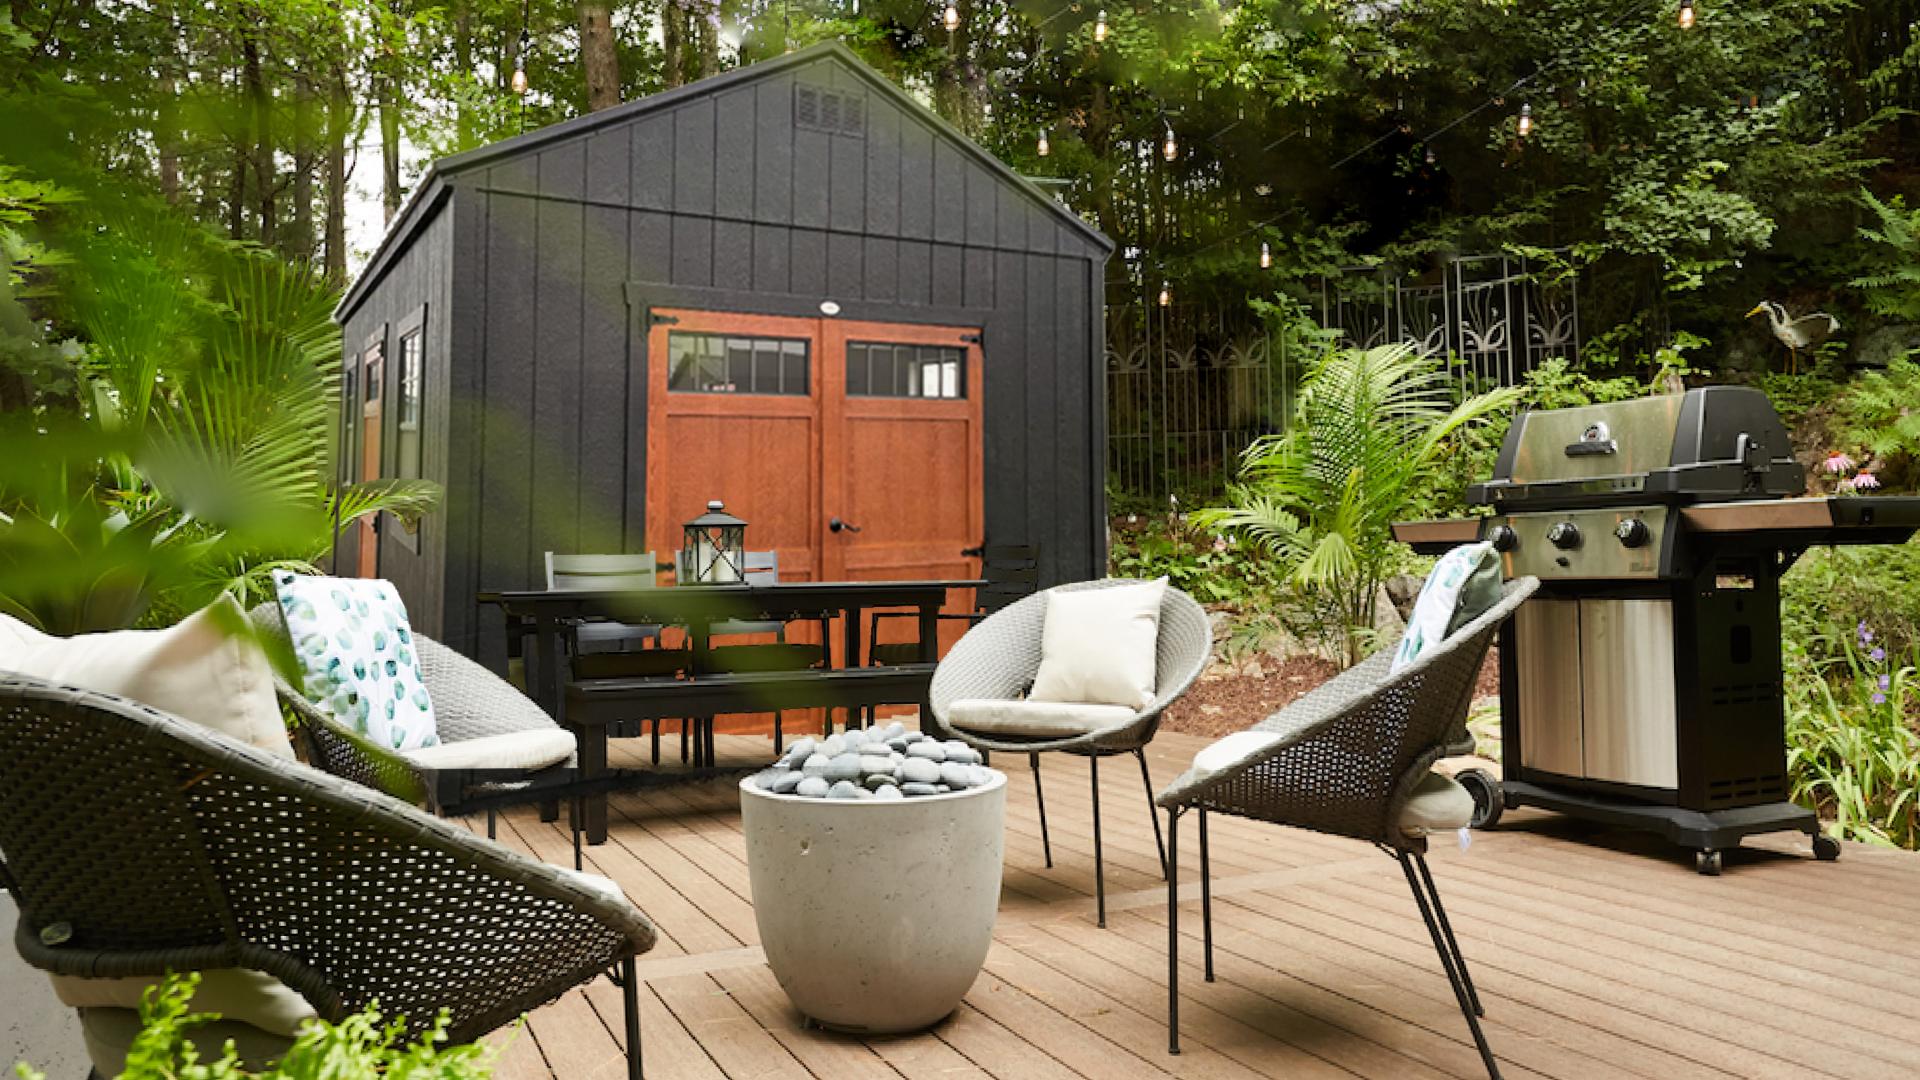 Compass Big Sky with black siding and brown double doors in a backyard with an outdoor table, grill, seating, and fire ring.